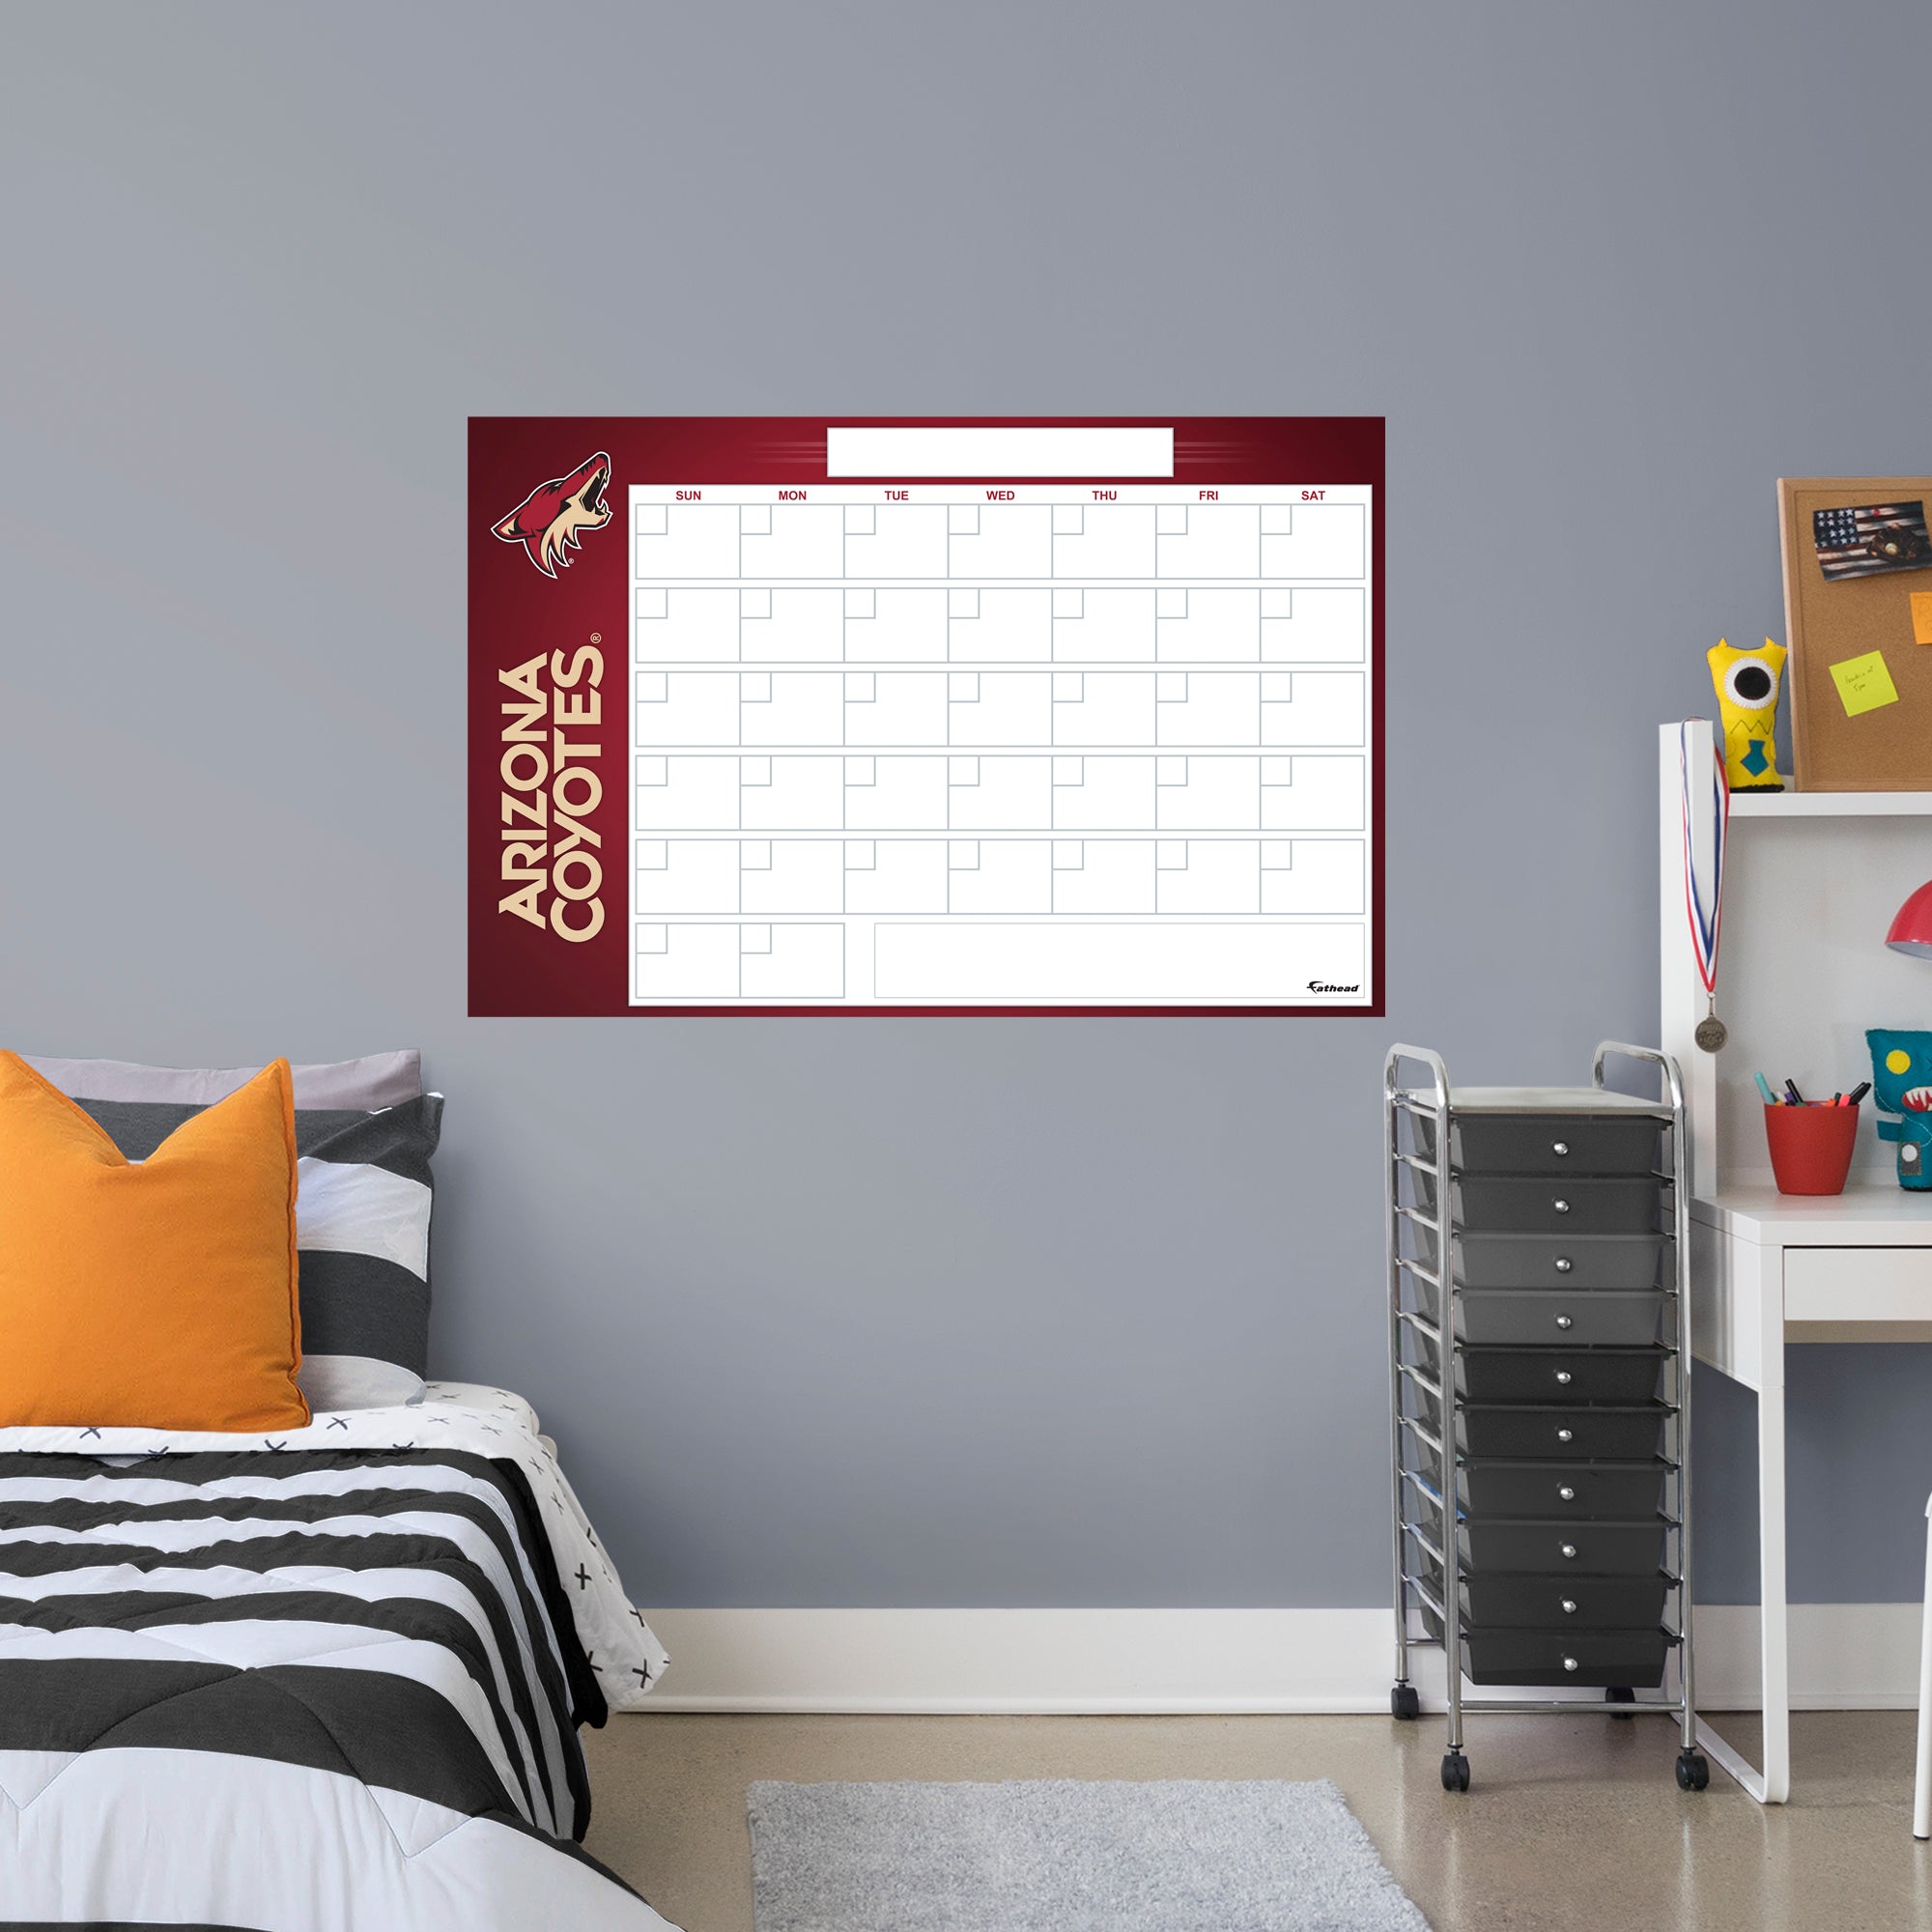 Arizona Coyotes Dry Erase Calendar - Officially Licensed NHL Removable Wall Decal Giant Decal (57"W x 34"H) by Fathead | Vinyl